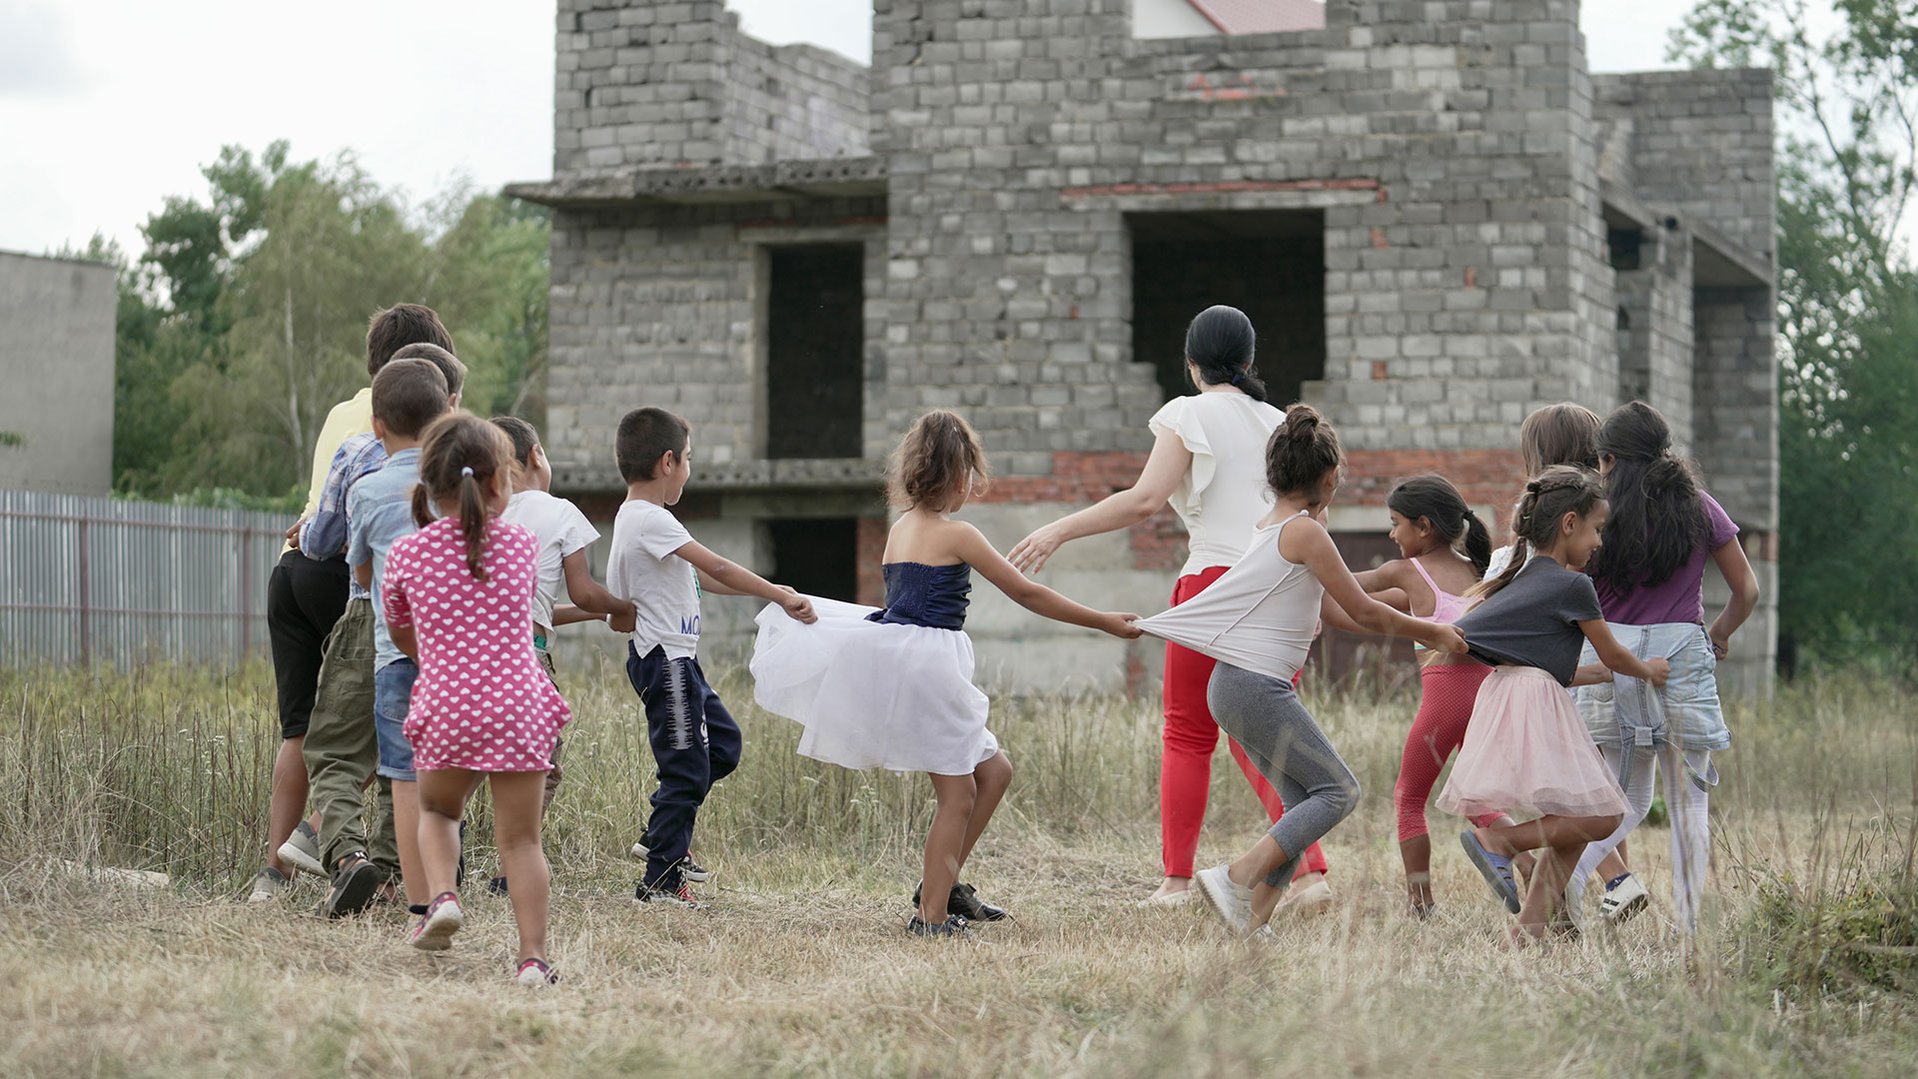 At War Child's Safe Space, refugee children from Ukraine can play, learn and sleep safe and sound